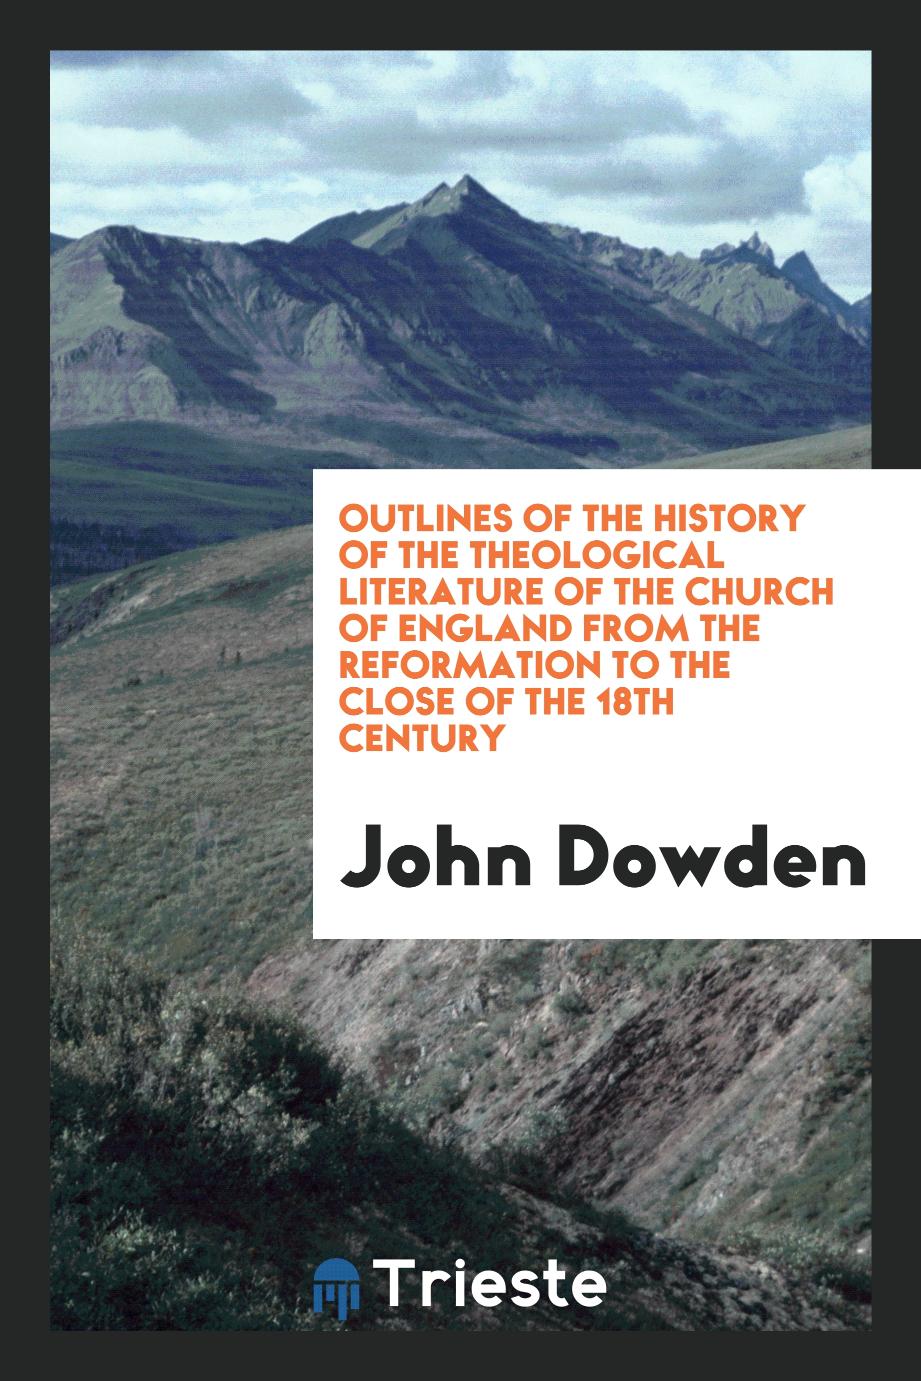 Outlines of the history of the theological literature of the Church of England from the Reformation to the close of the 18th century